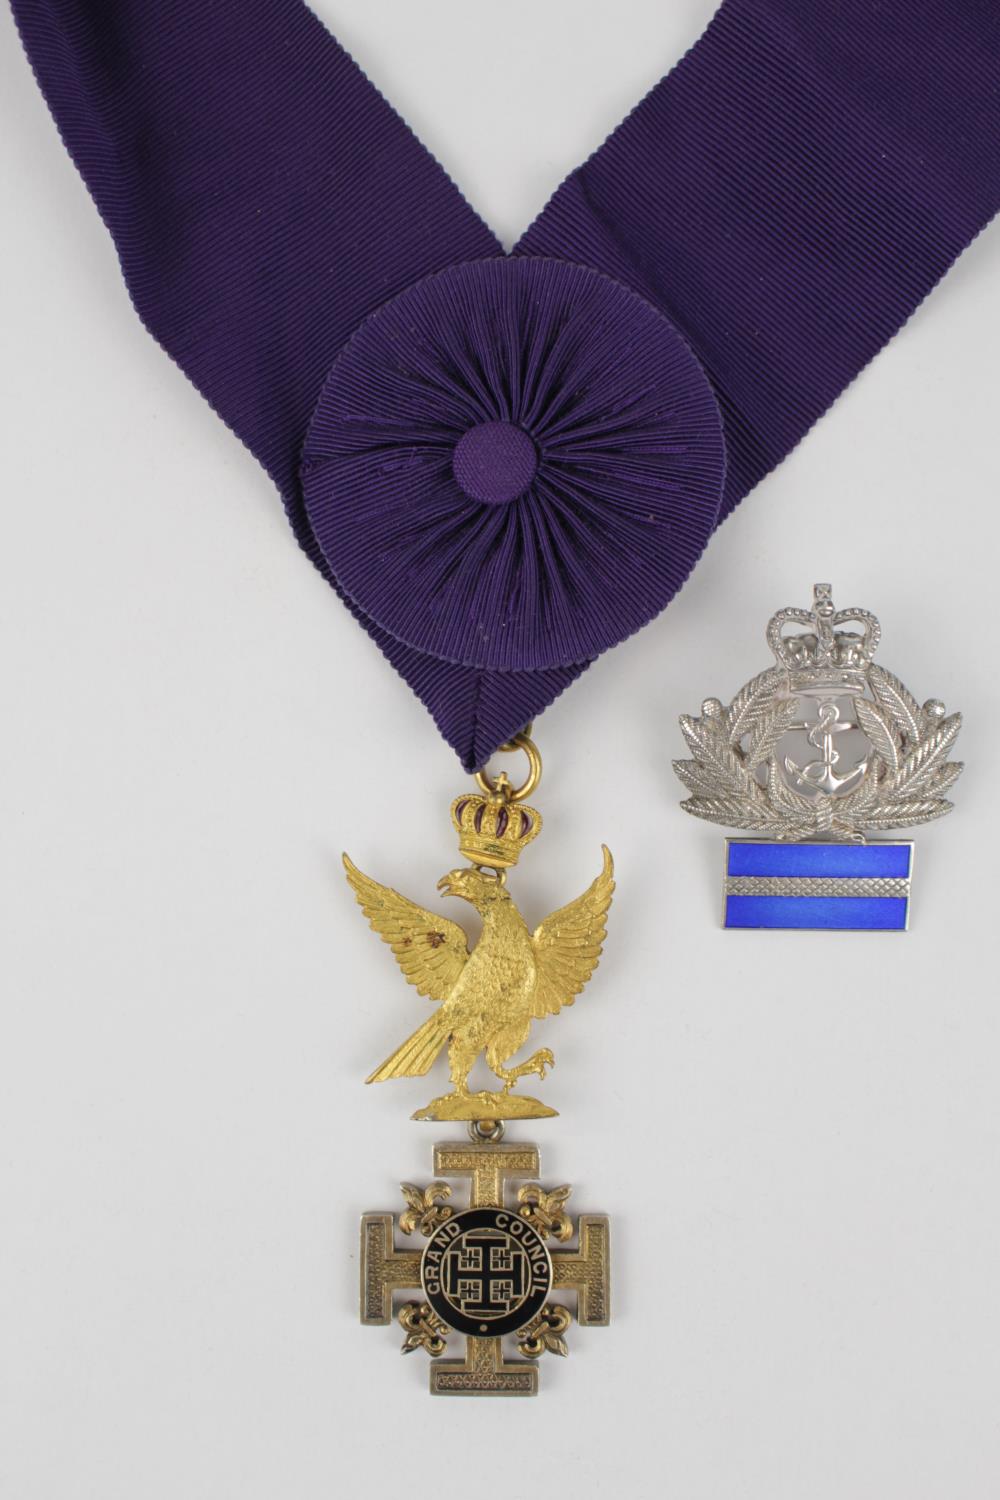 Grand Council enamelled cross surmounted with Gilded Eagle on Ribbon and a Silver enamelled Cap